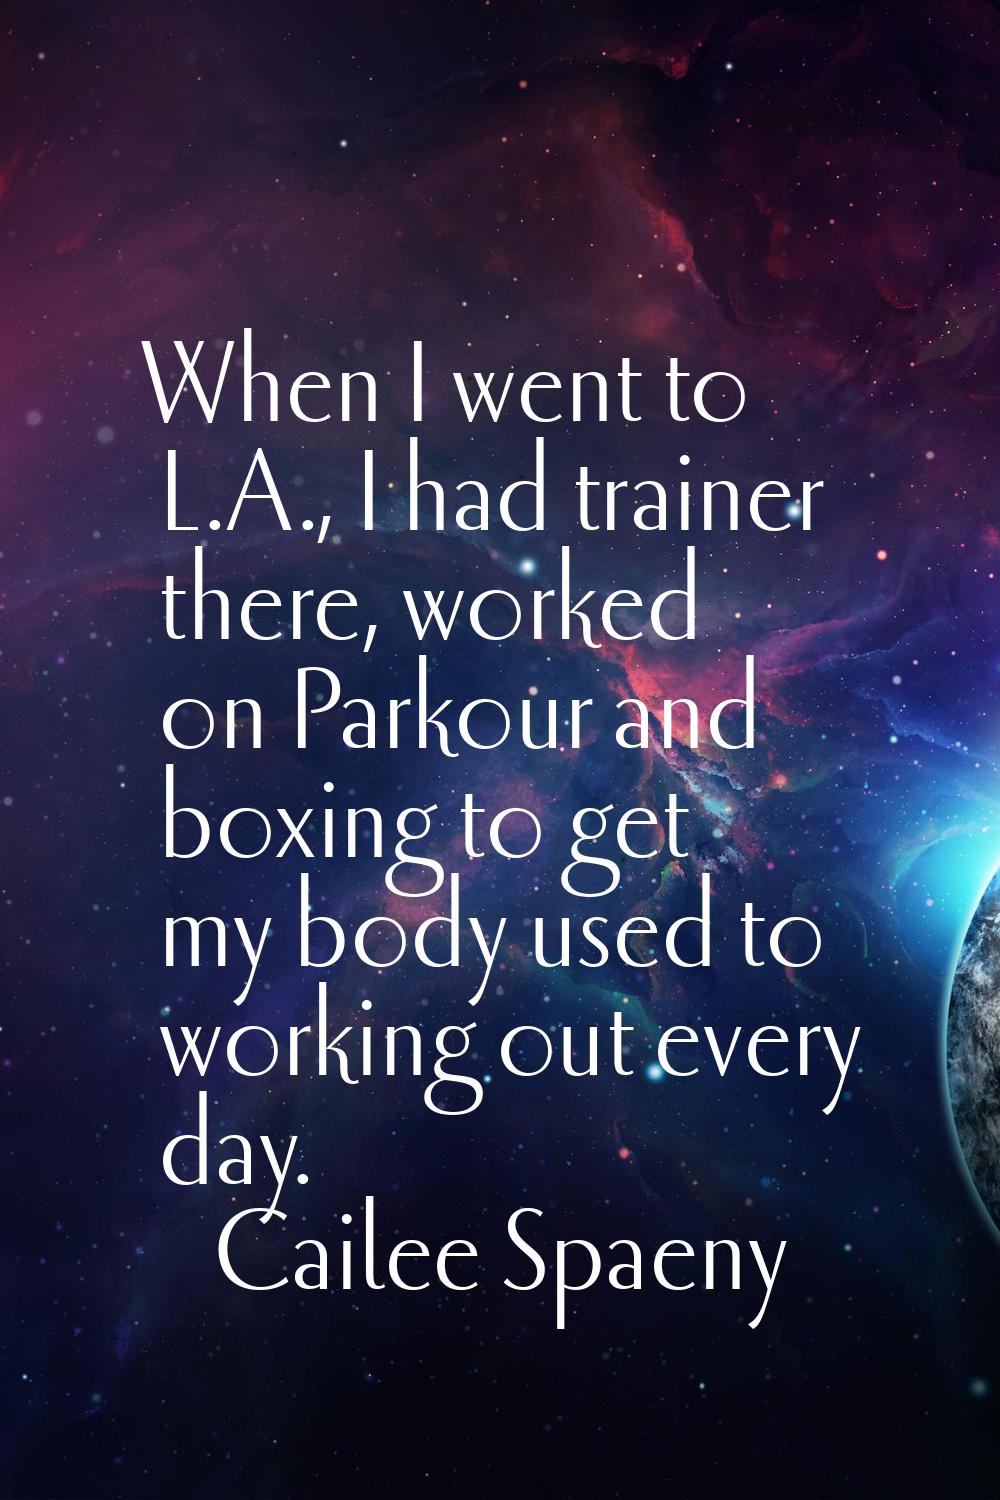 When I went to L.A., I had trainer there, worked on Parkour and boxing to get my body used to worki